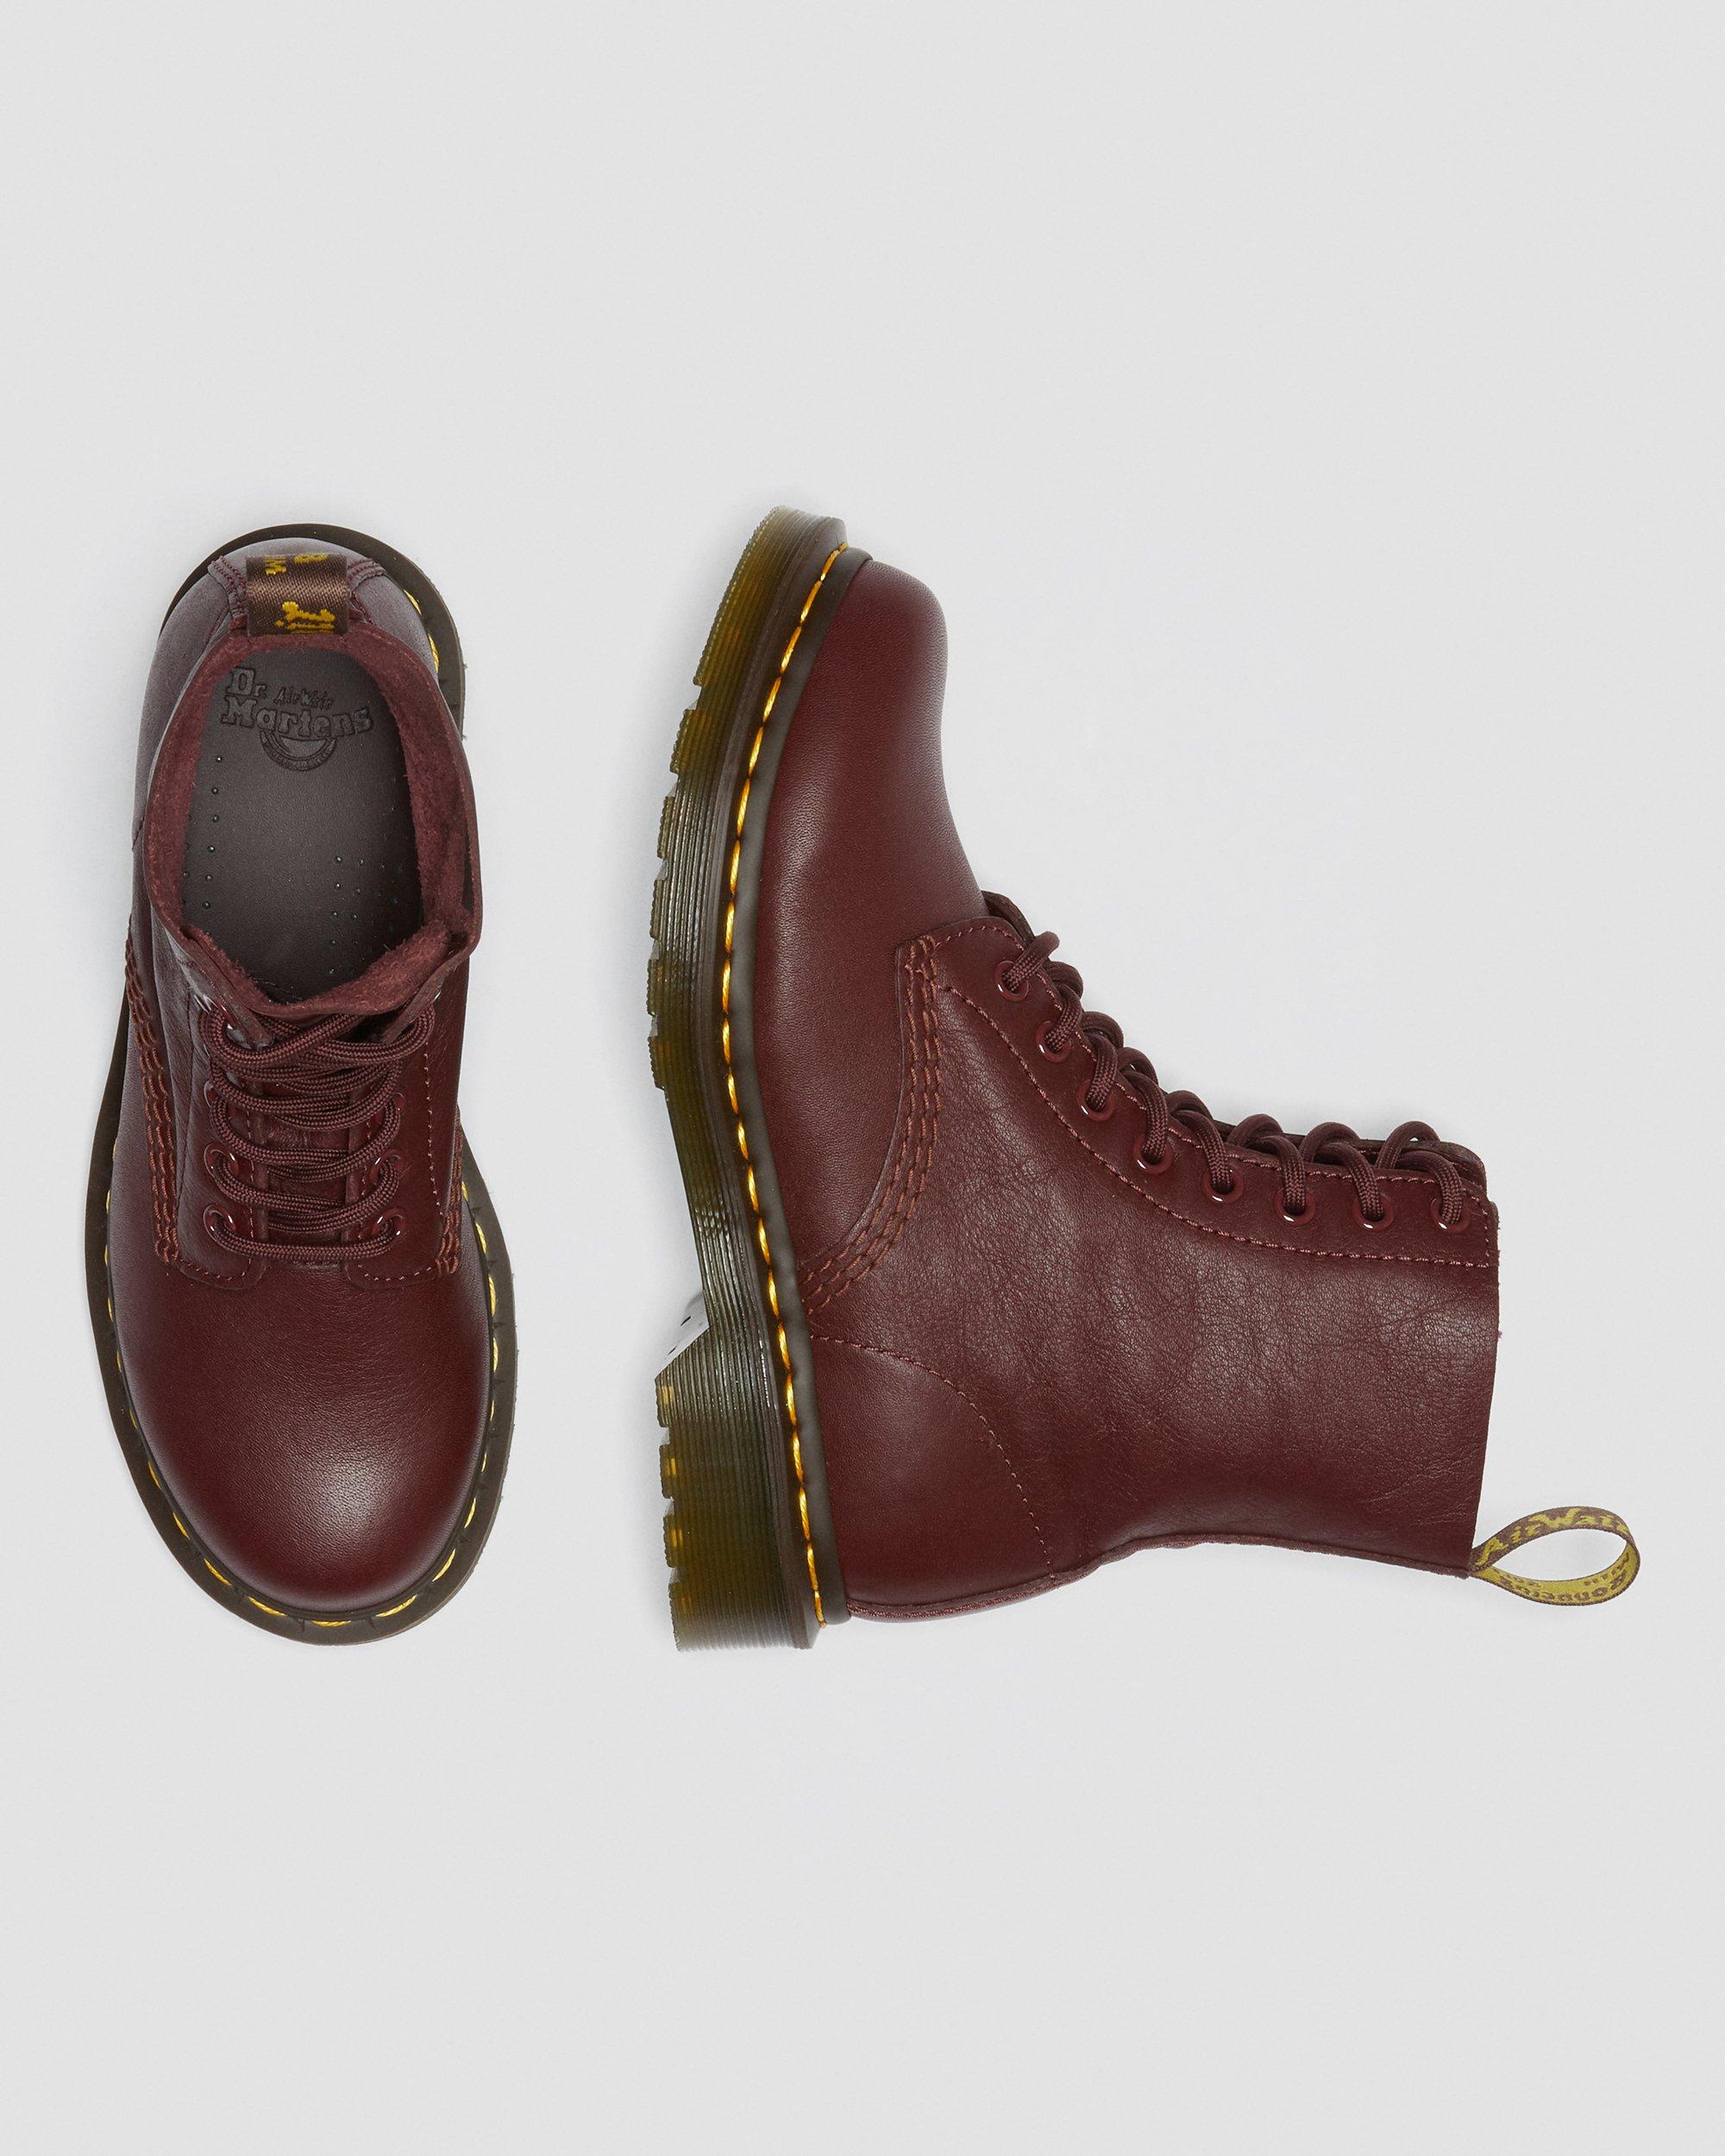 Martens Pascal Virginia Cherry Red Winter Boots | vlr.eng.br